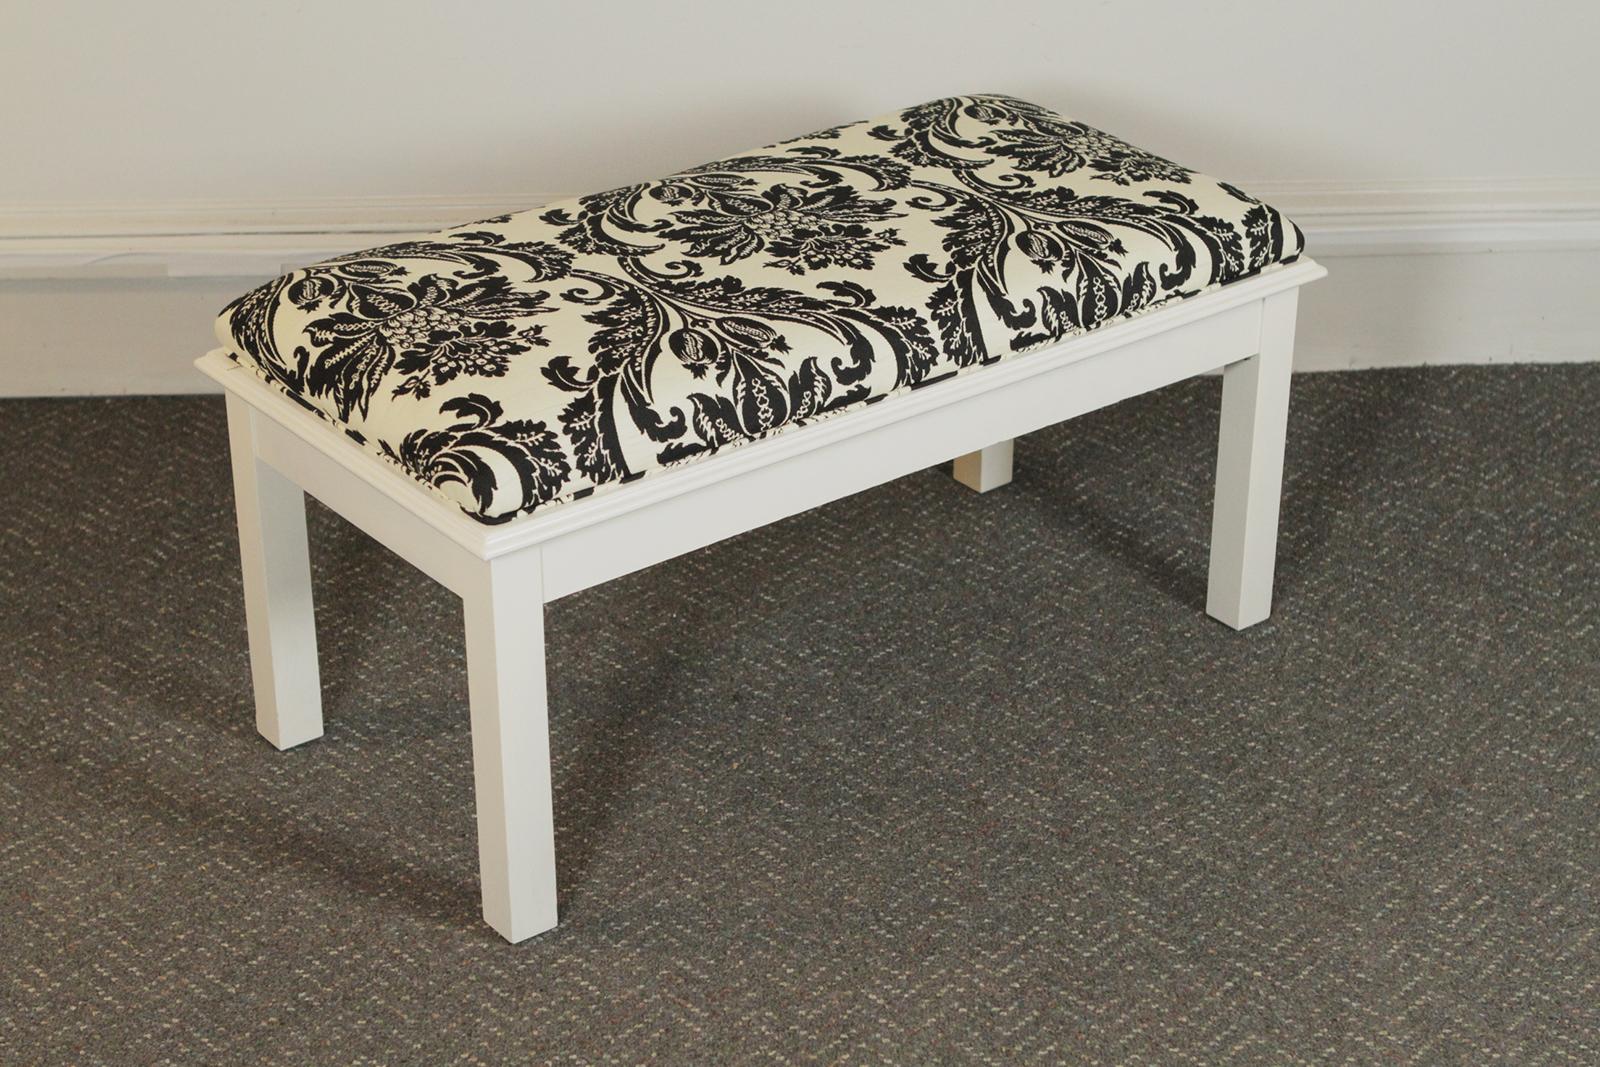 Pair of modern white painted wood upholstered benches.
 Dimensions: 36” W x 18” D x 18” H.